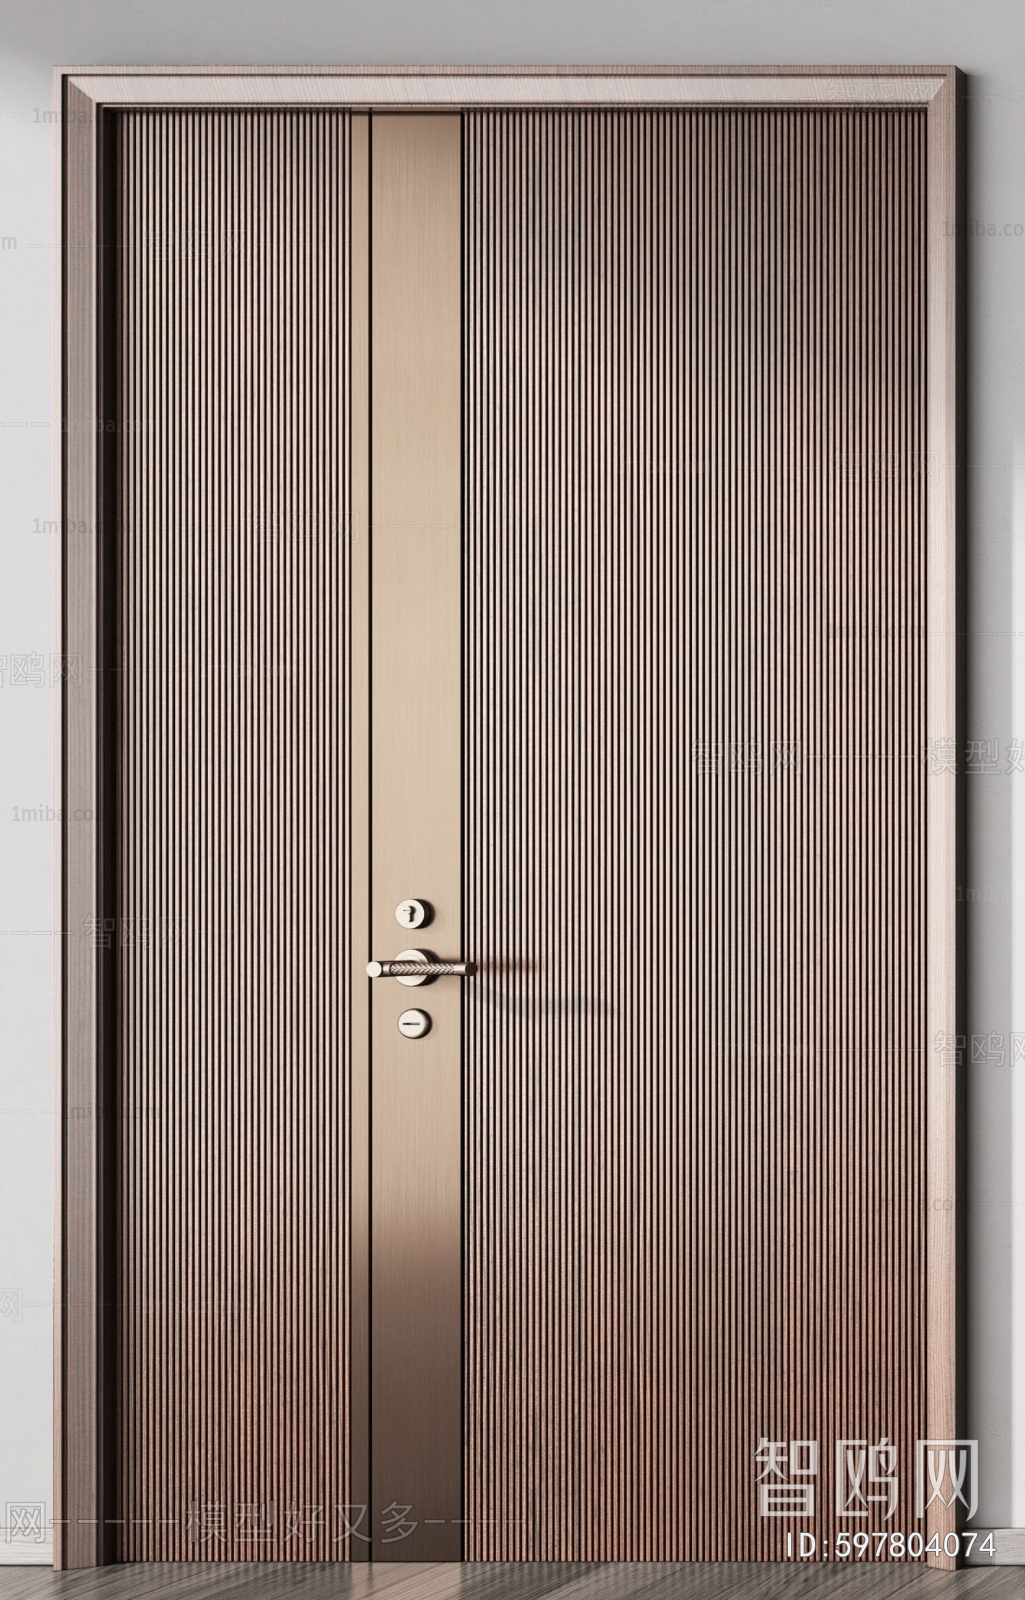 Modern New Chinese Style Double Door